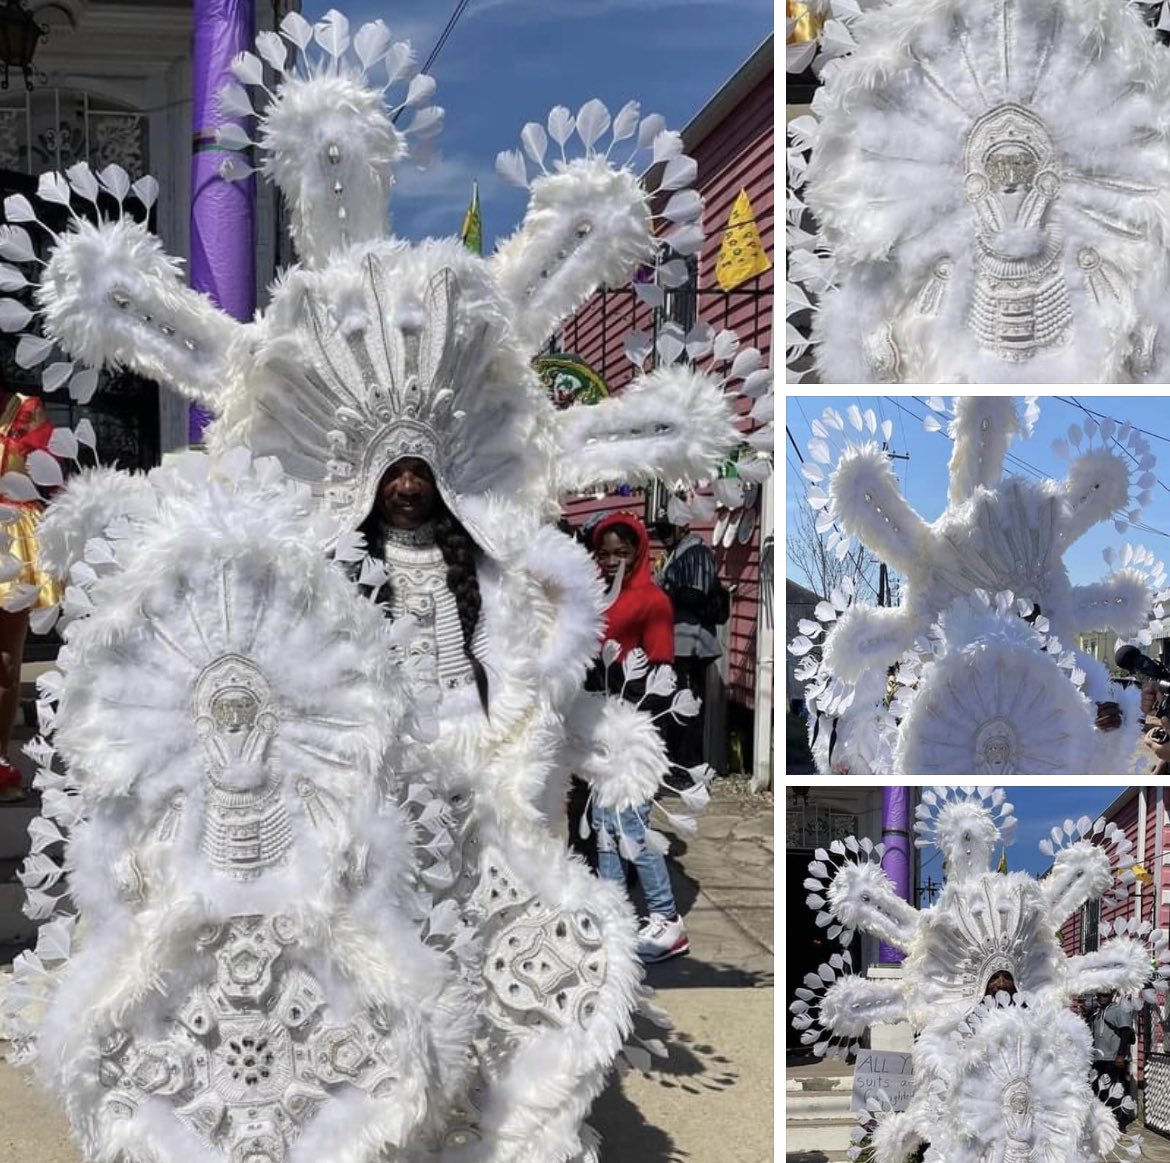 In case you wanted to see the back and really know what heaven walking around on earth looks like….  #MardiGrasIndians #NOLA #fortheculture